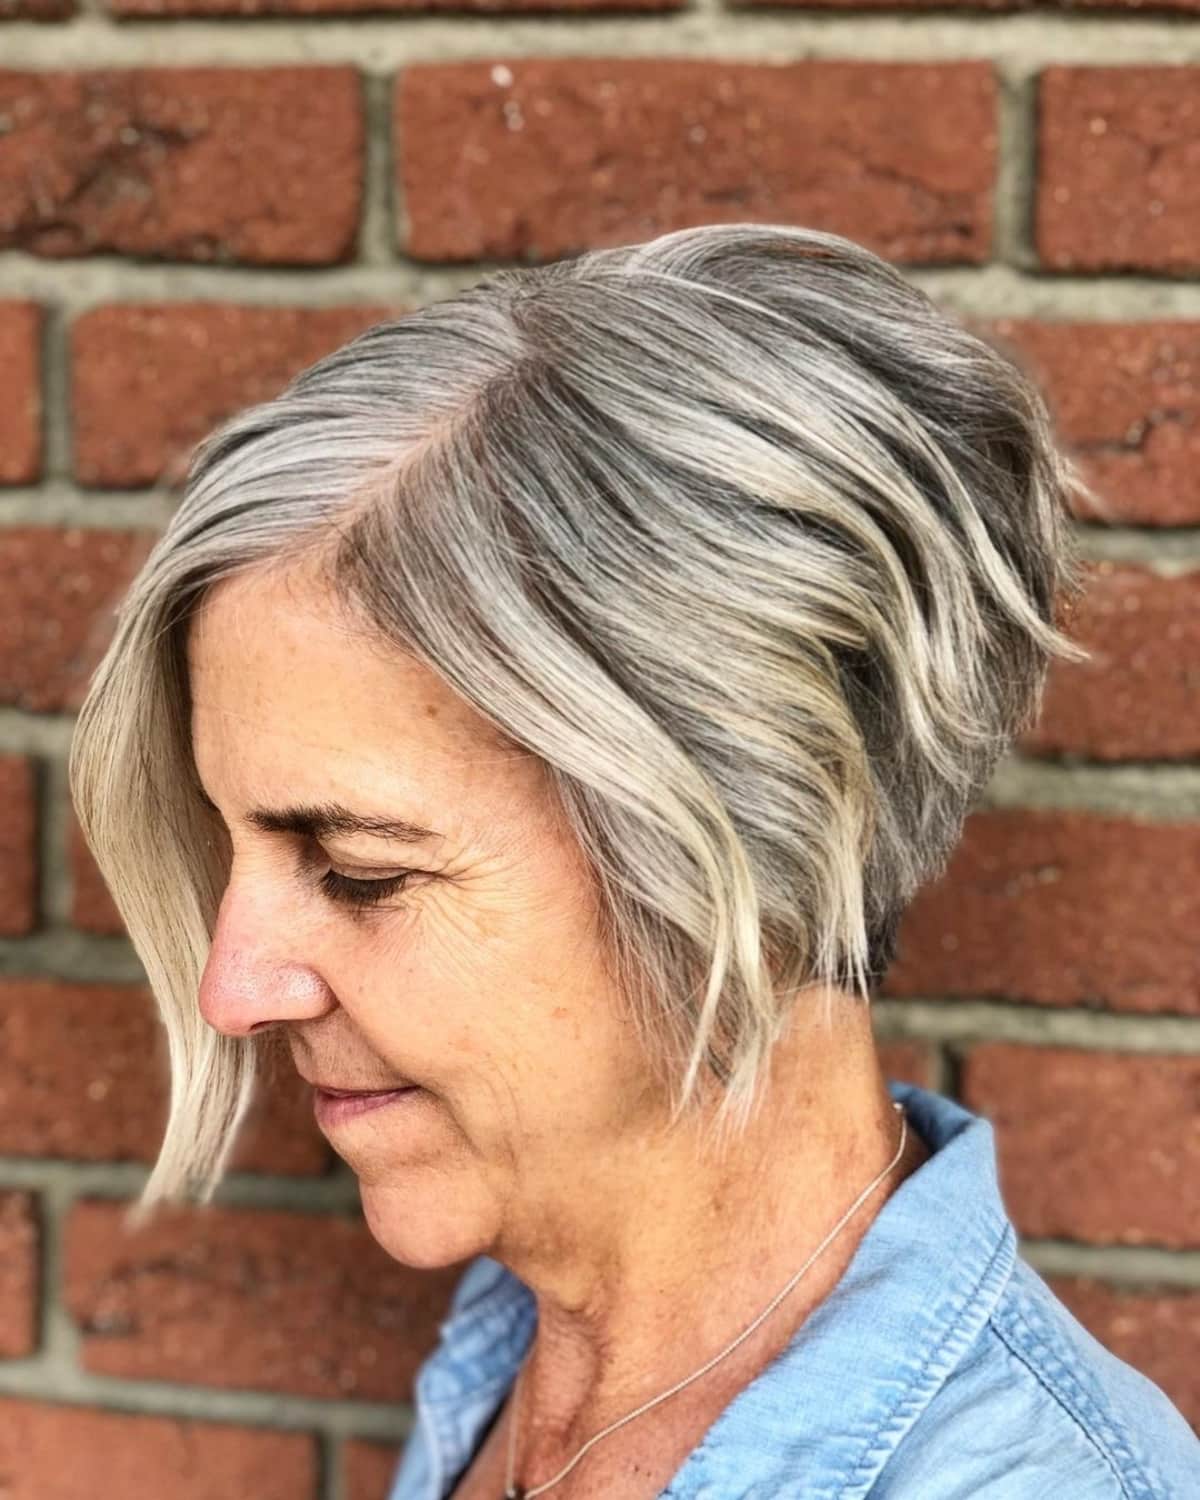 21 Modern Layered Bob Haircuts For Women Over 50 To Take Years Off Hairstyles Vip